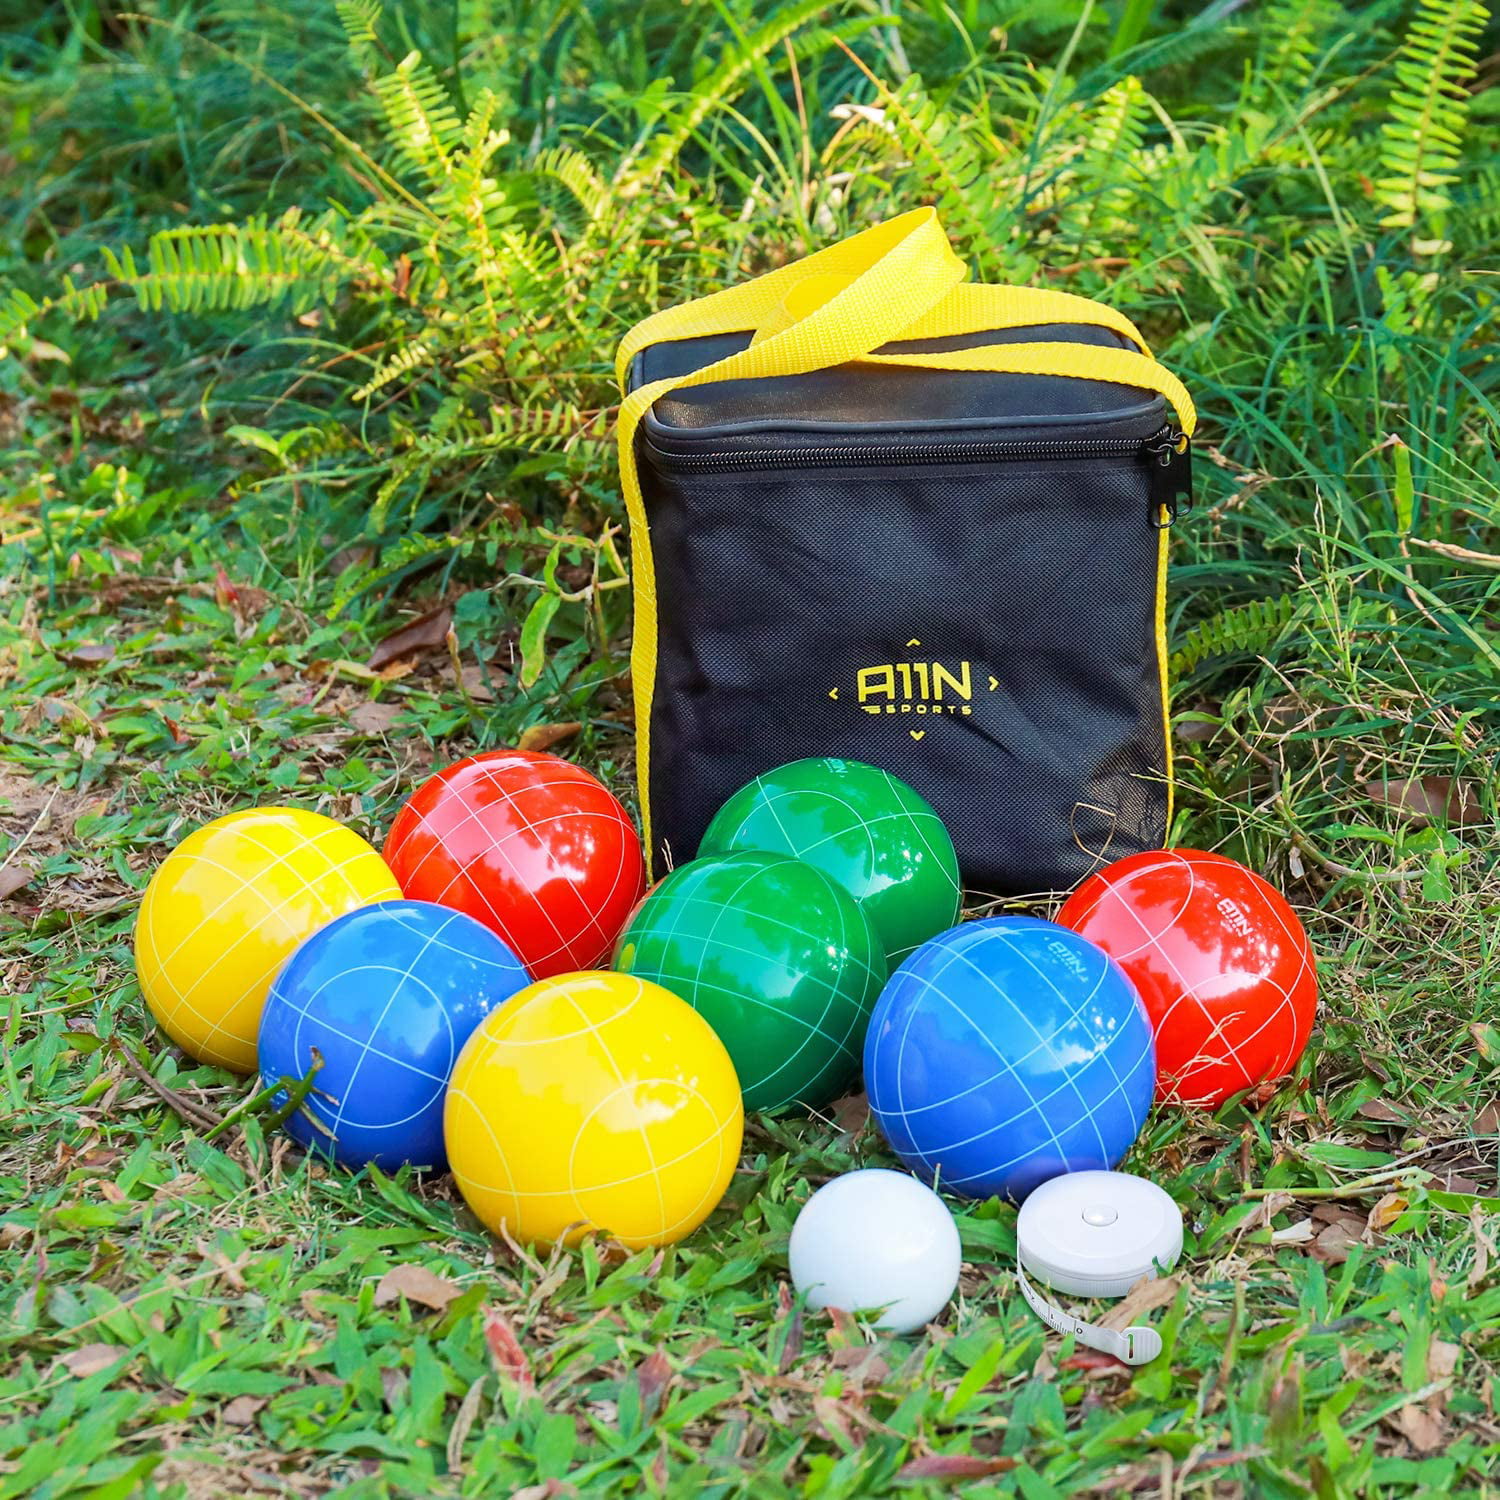 A11N 90mm/107mm Bocce Ball Set with 8 Resin Balls, Pallino, Carrying Bag,  and Measuring Tape for Backyard, Lawn, Beach Game